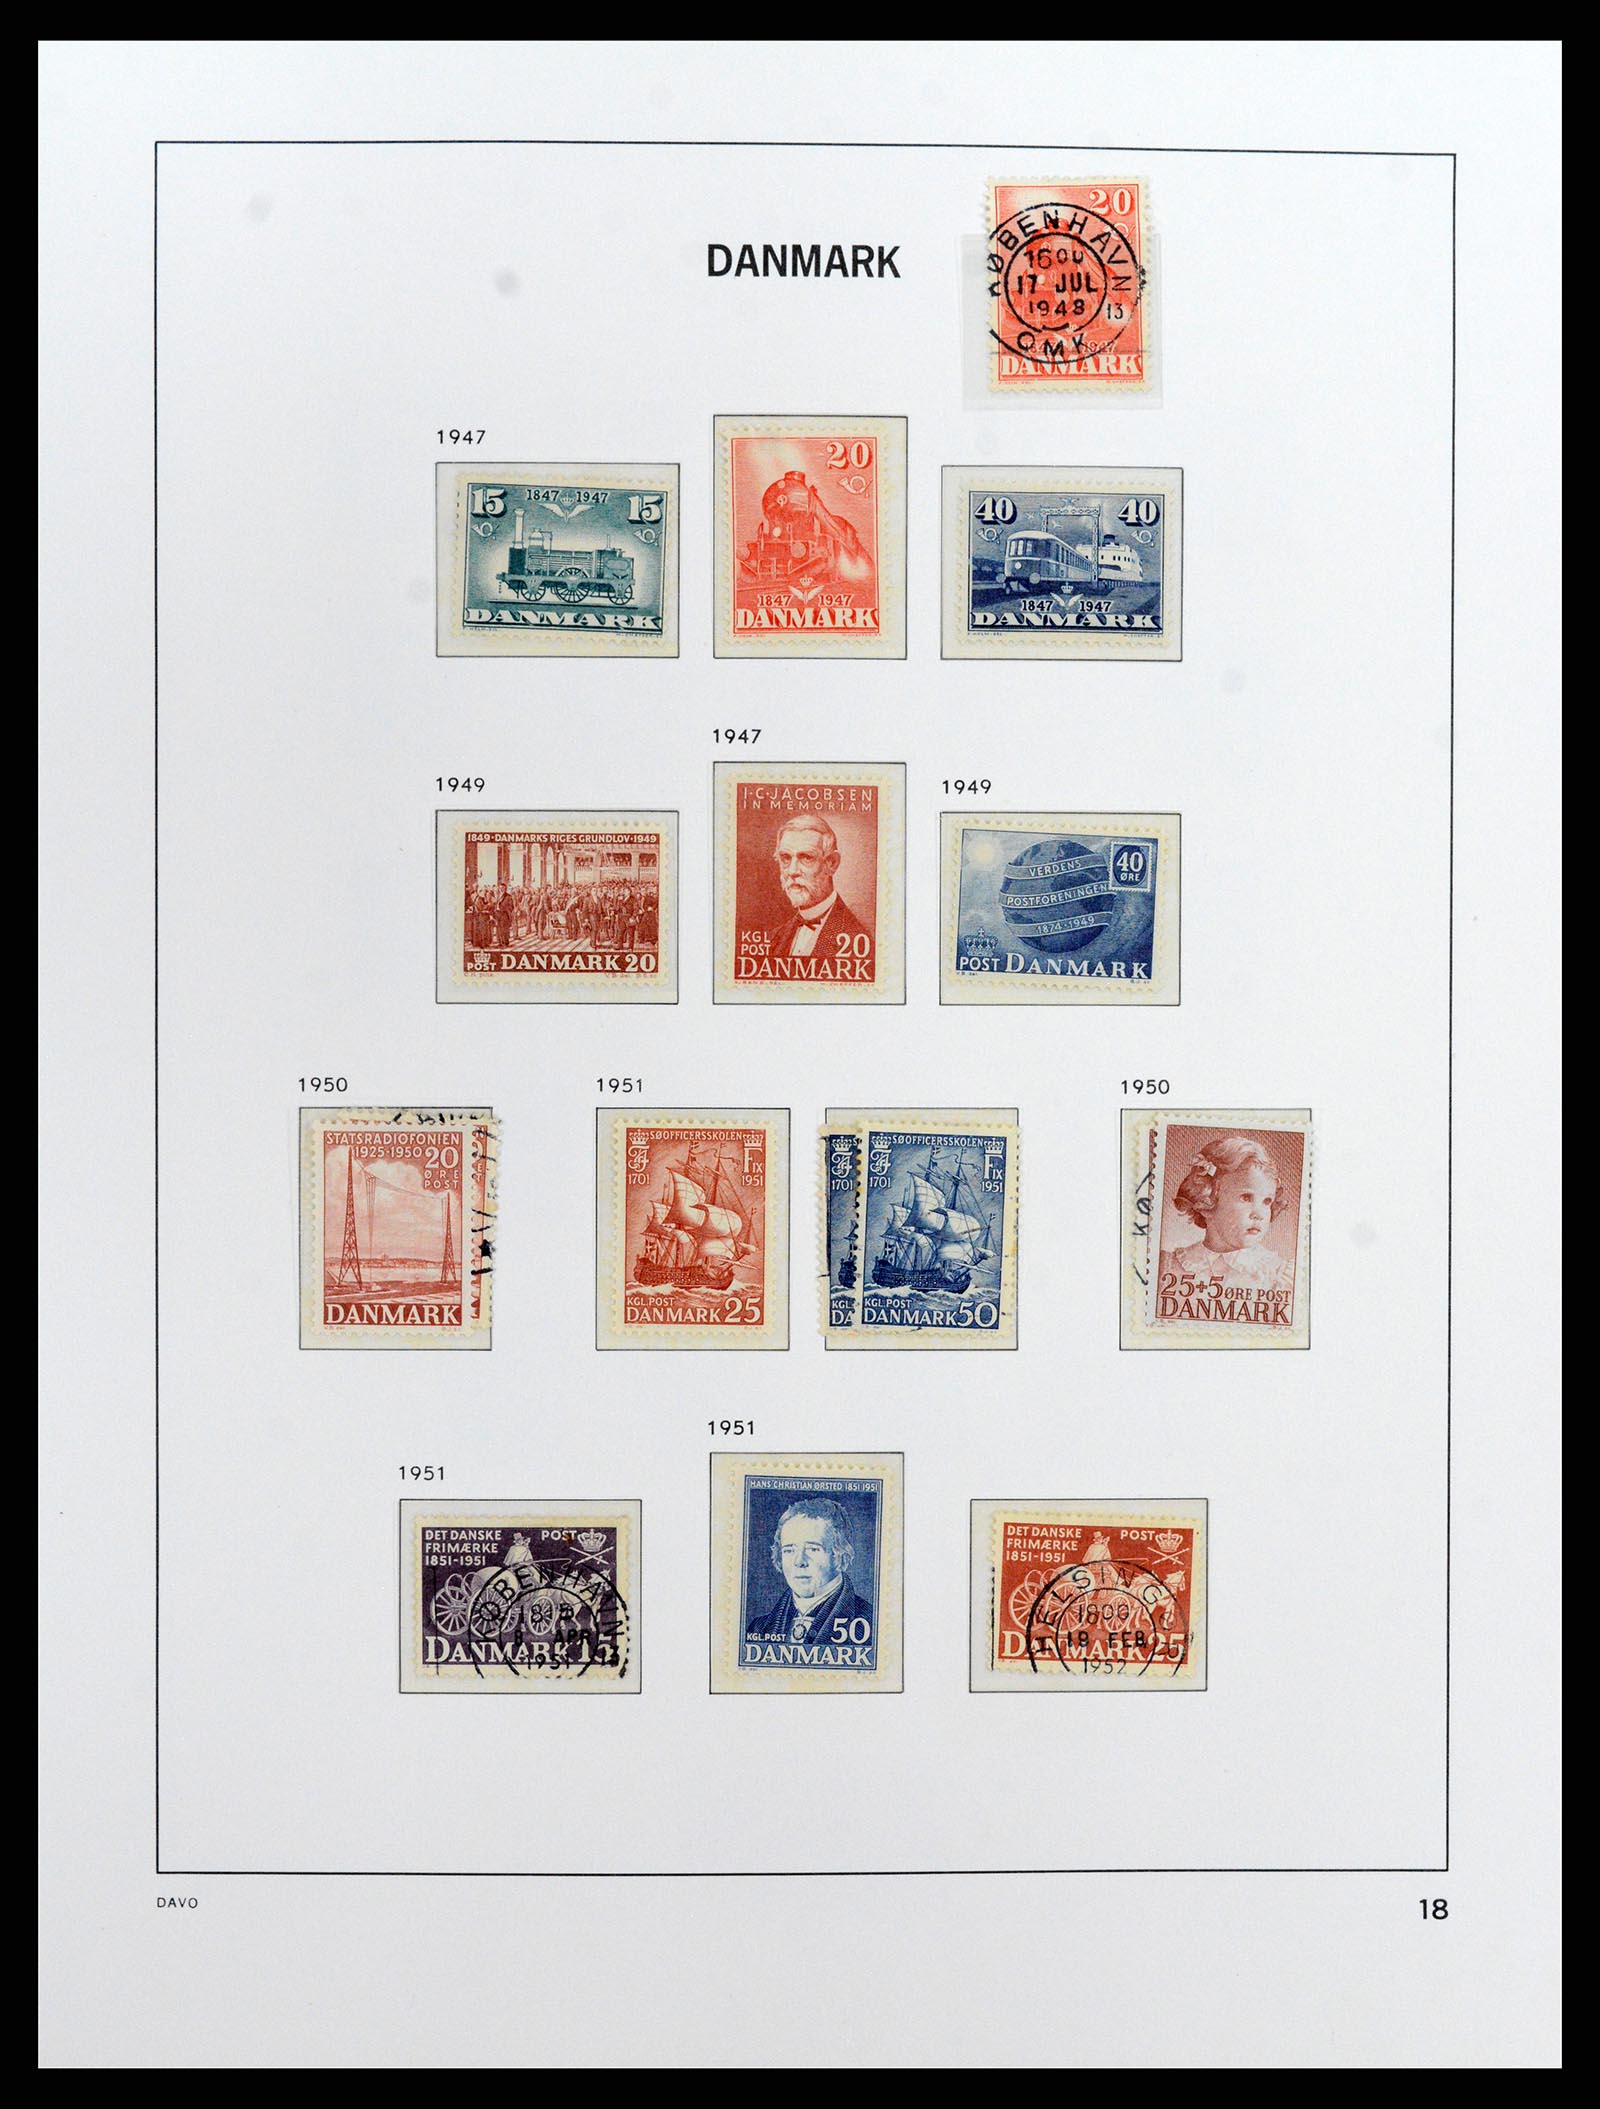 37801 018 - Stamp Collection 37801 Denmark 1851-1999.